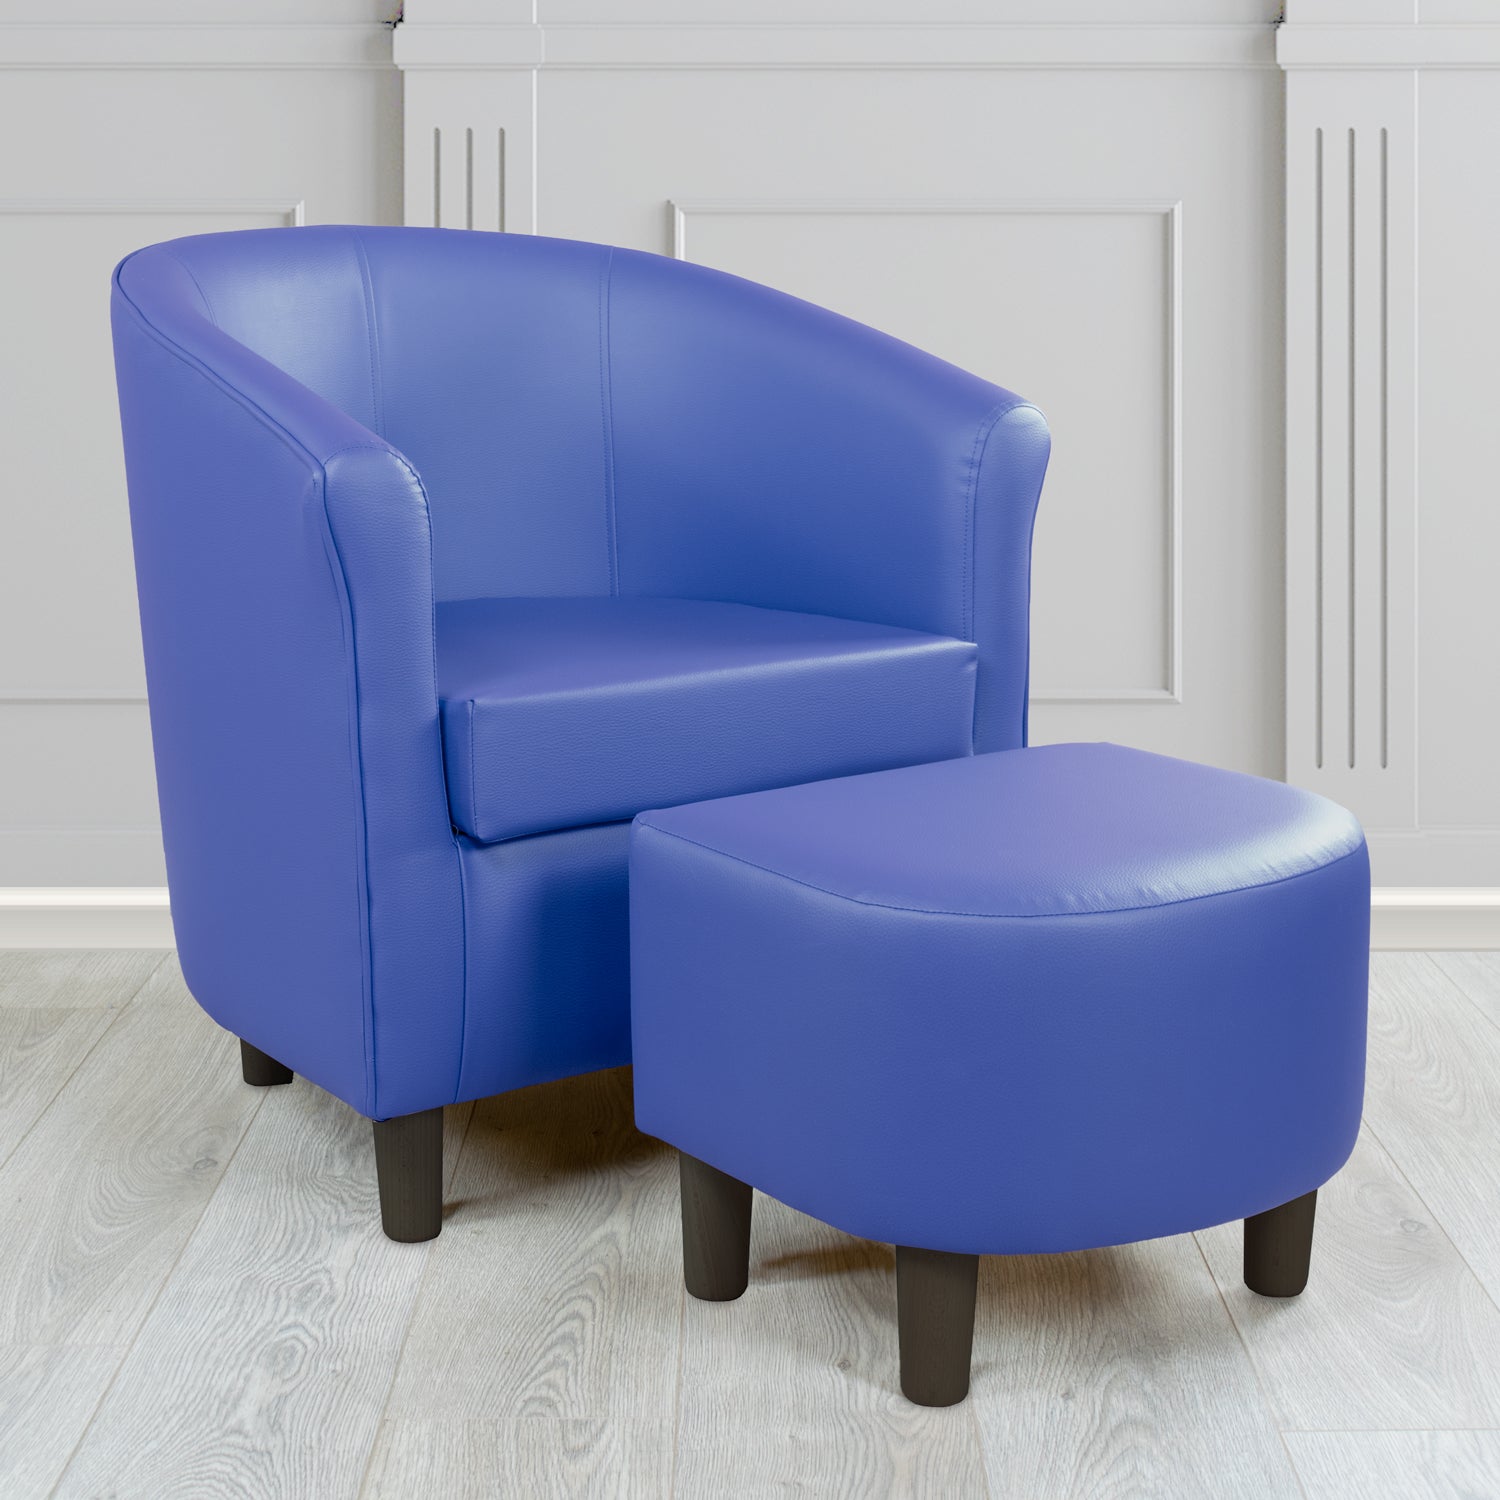 Tuscany Just Colour Lupin Faux Leather Tub Chair with Footstool Set - The Tub Chair Shop